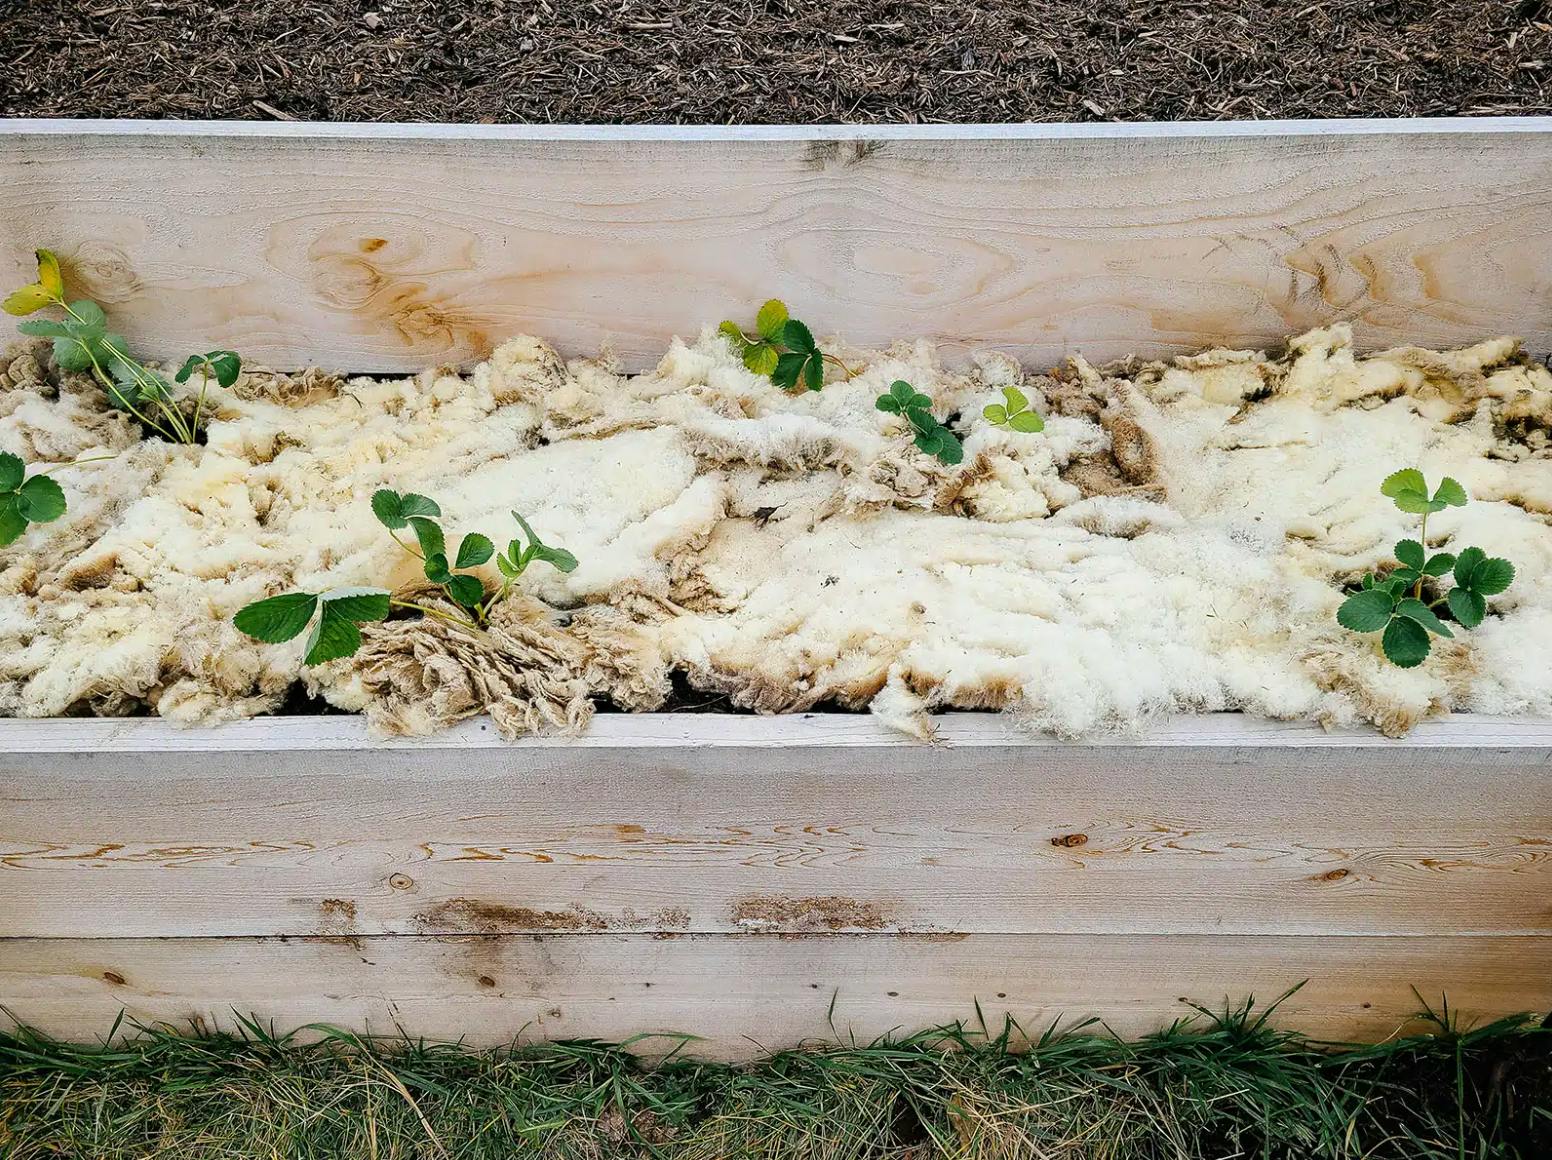 Sheep wool used as mulch in a strawberry bed